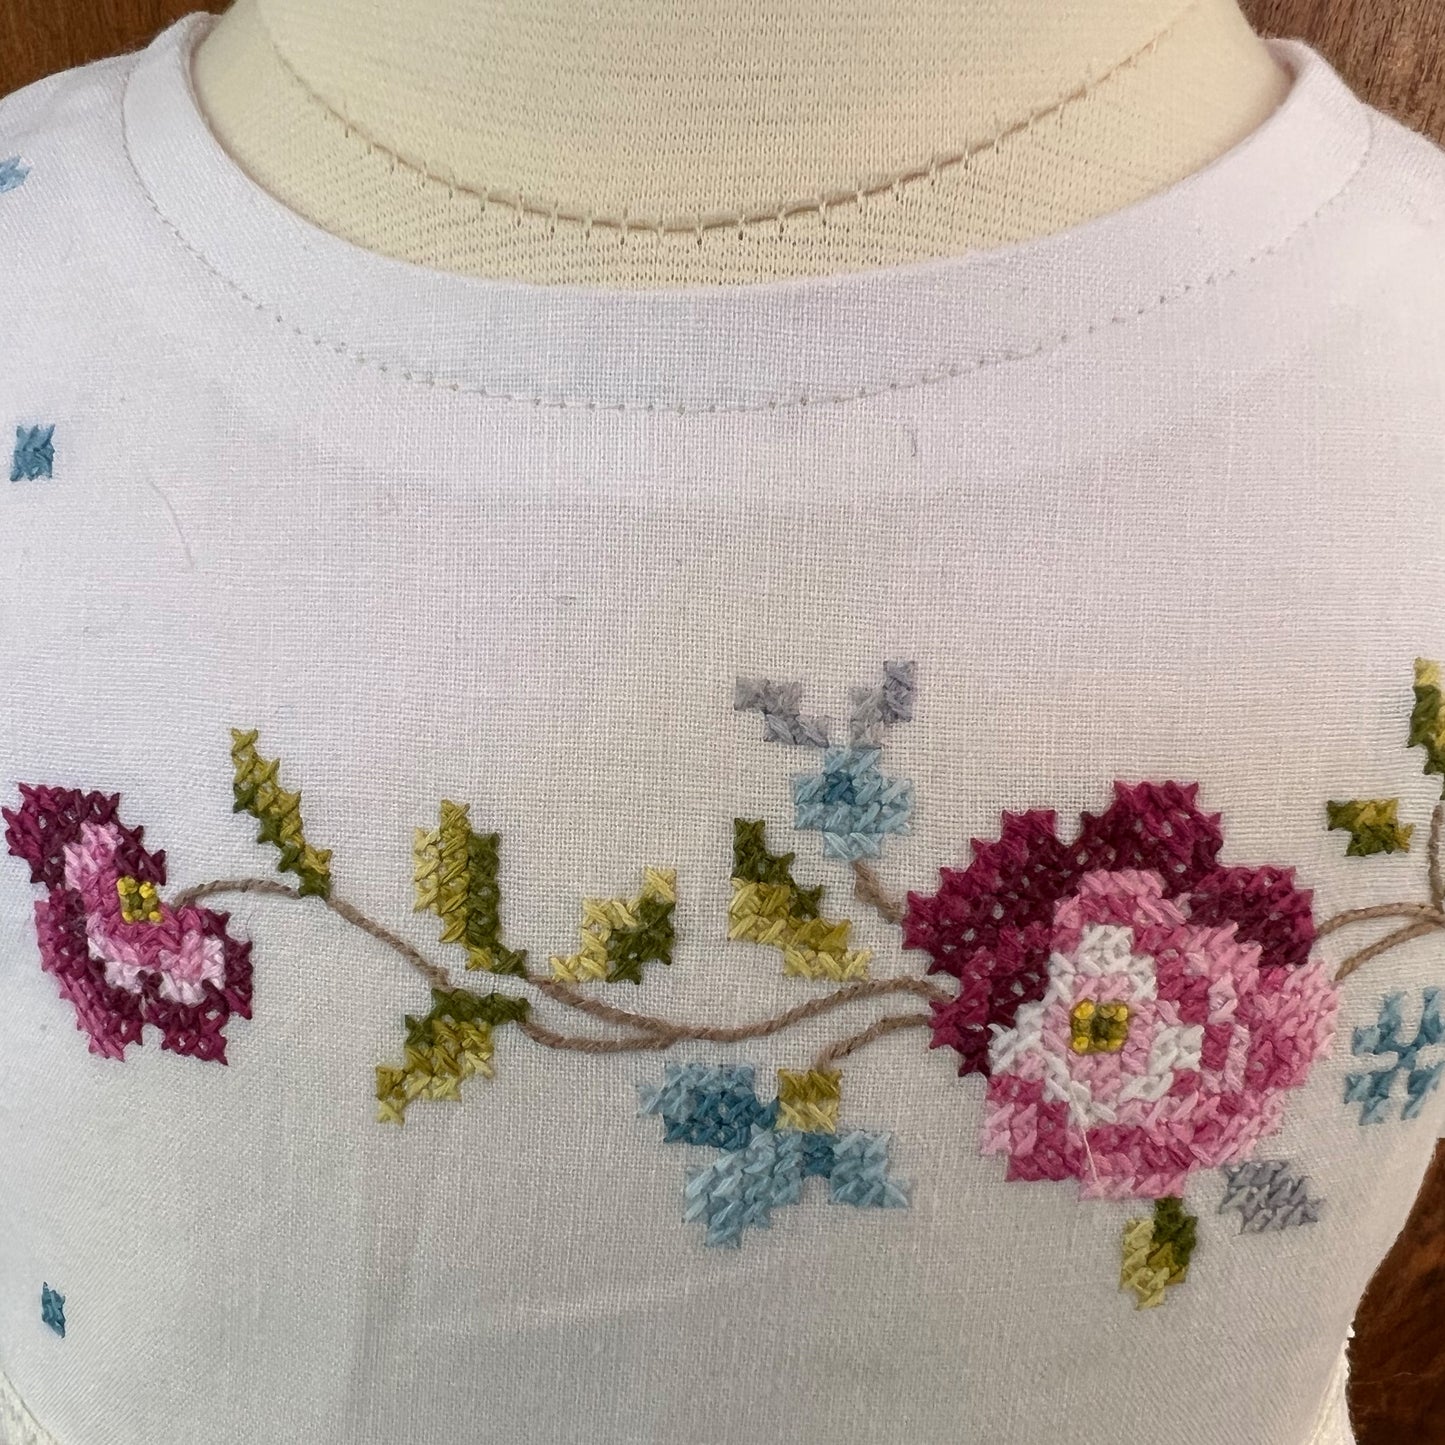 Sweet 9-12 embroidered top and bloomers using vintage linens and lace. Hand embroidery. Free Shipping.